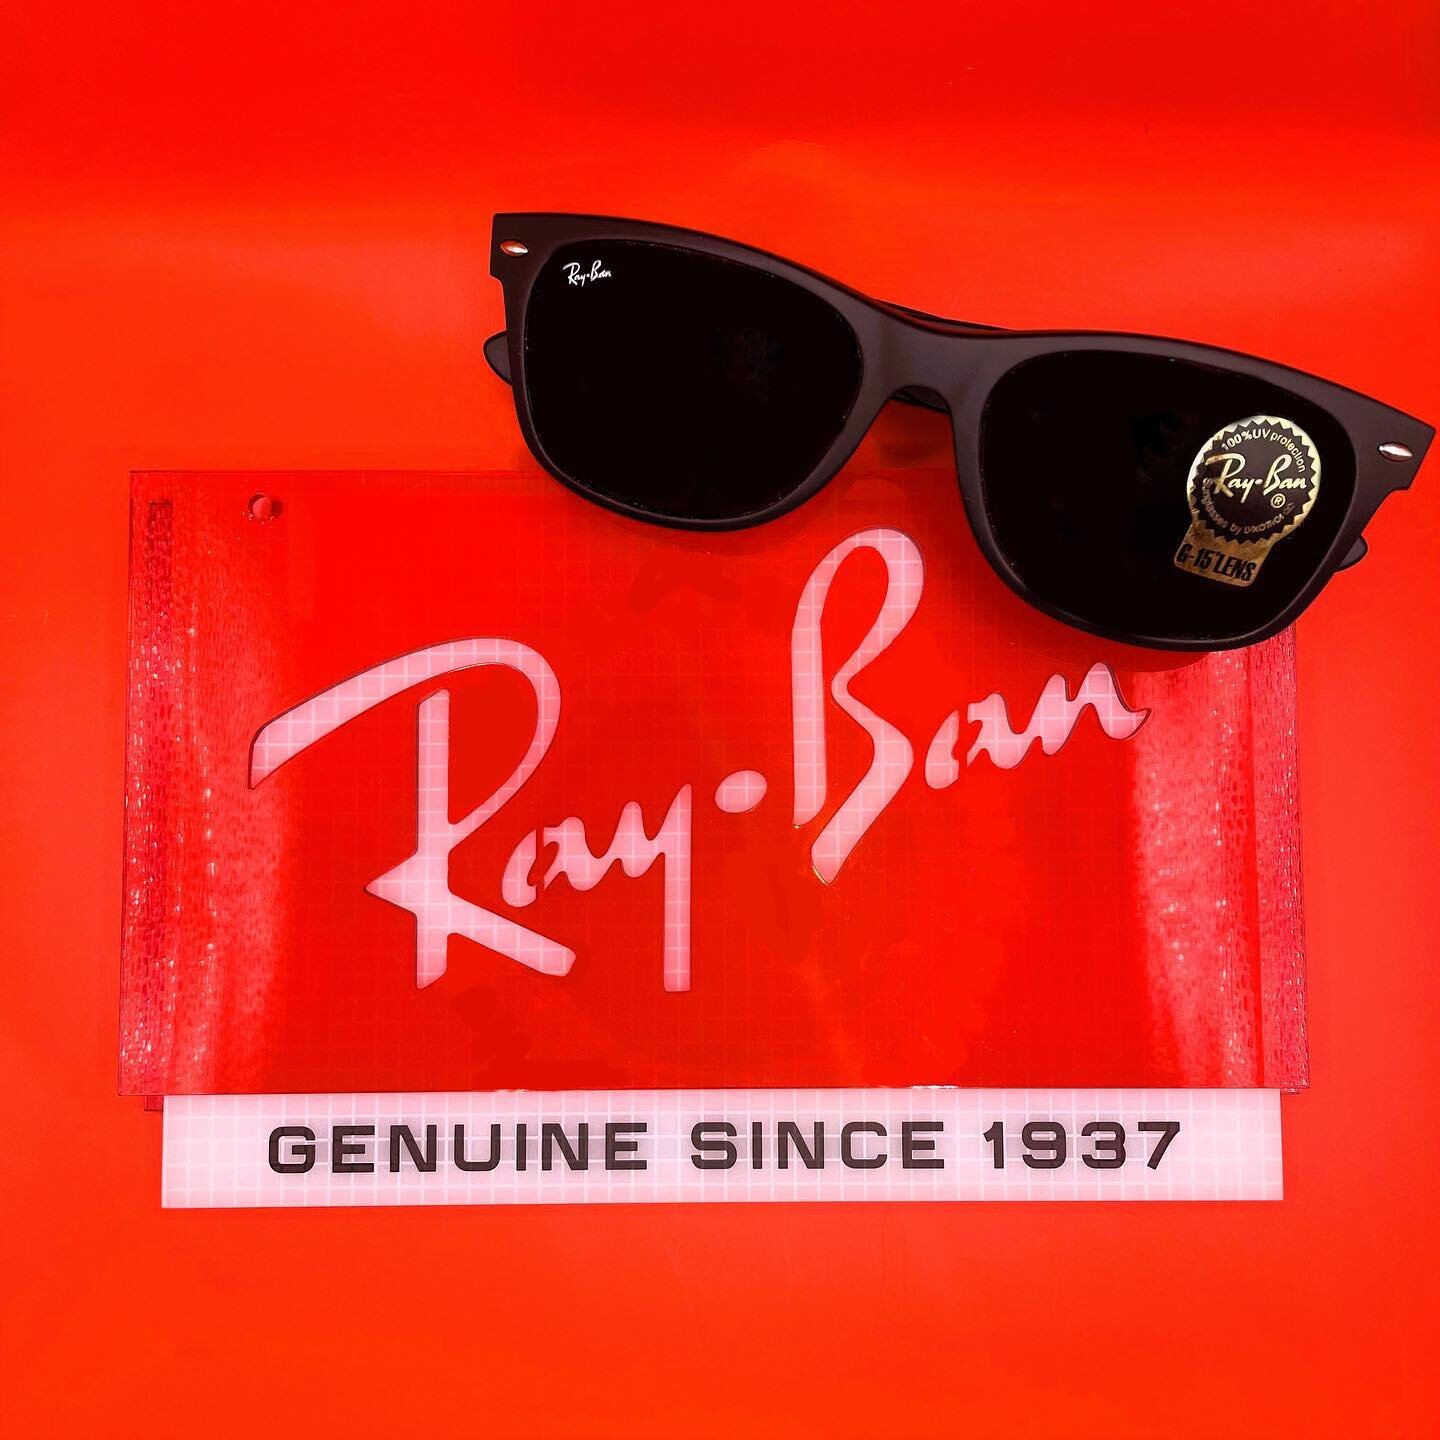 Fancy a RayBan? Have an extra for just half the price!